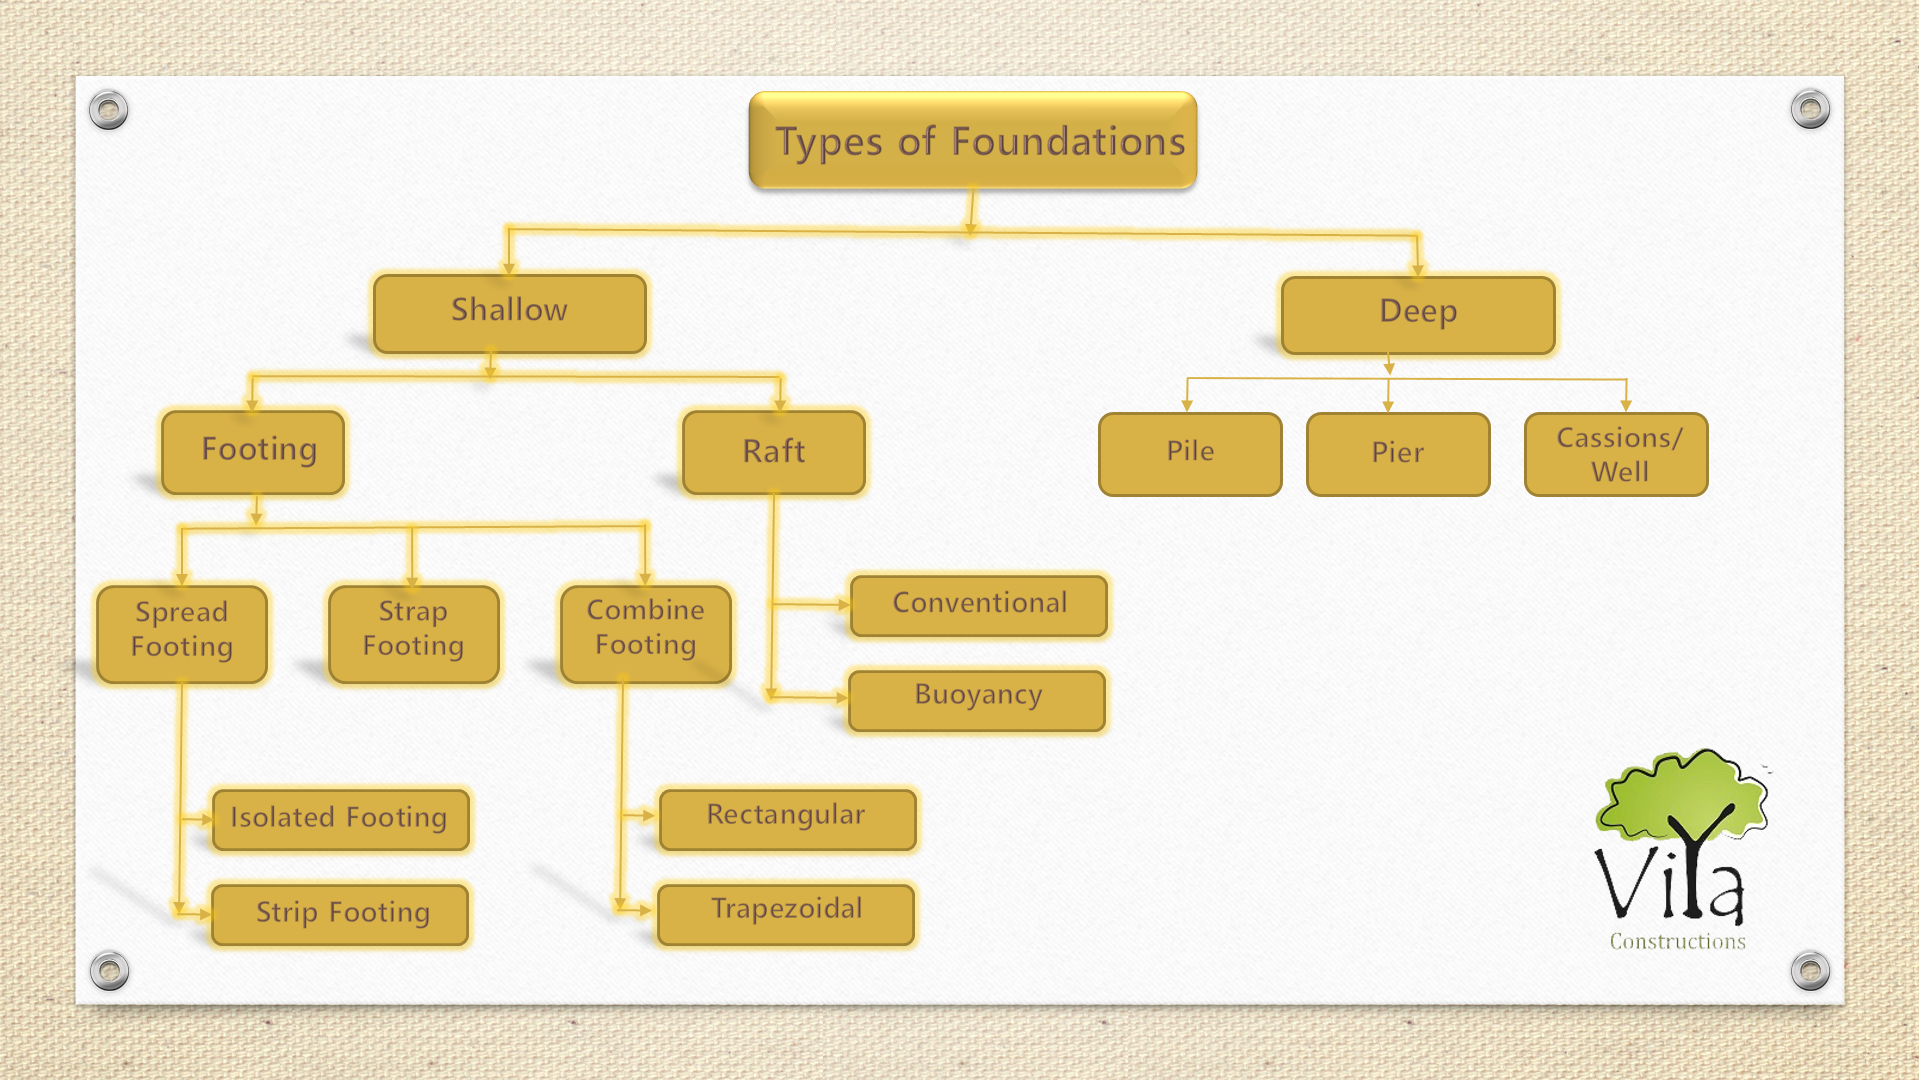 Types of foundation - deep foundation and shallow foundation